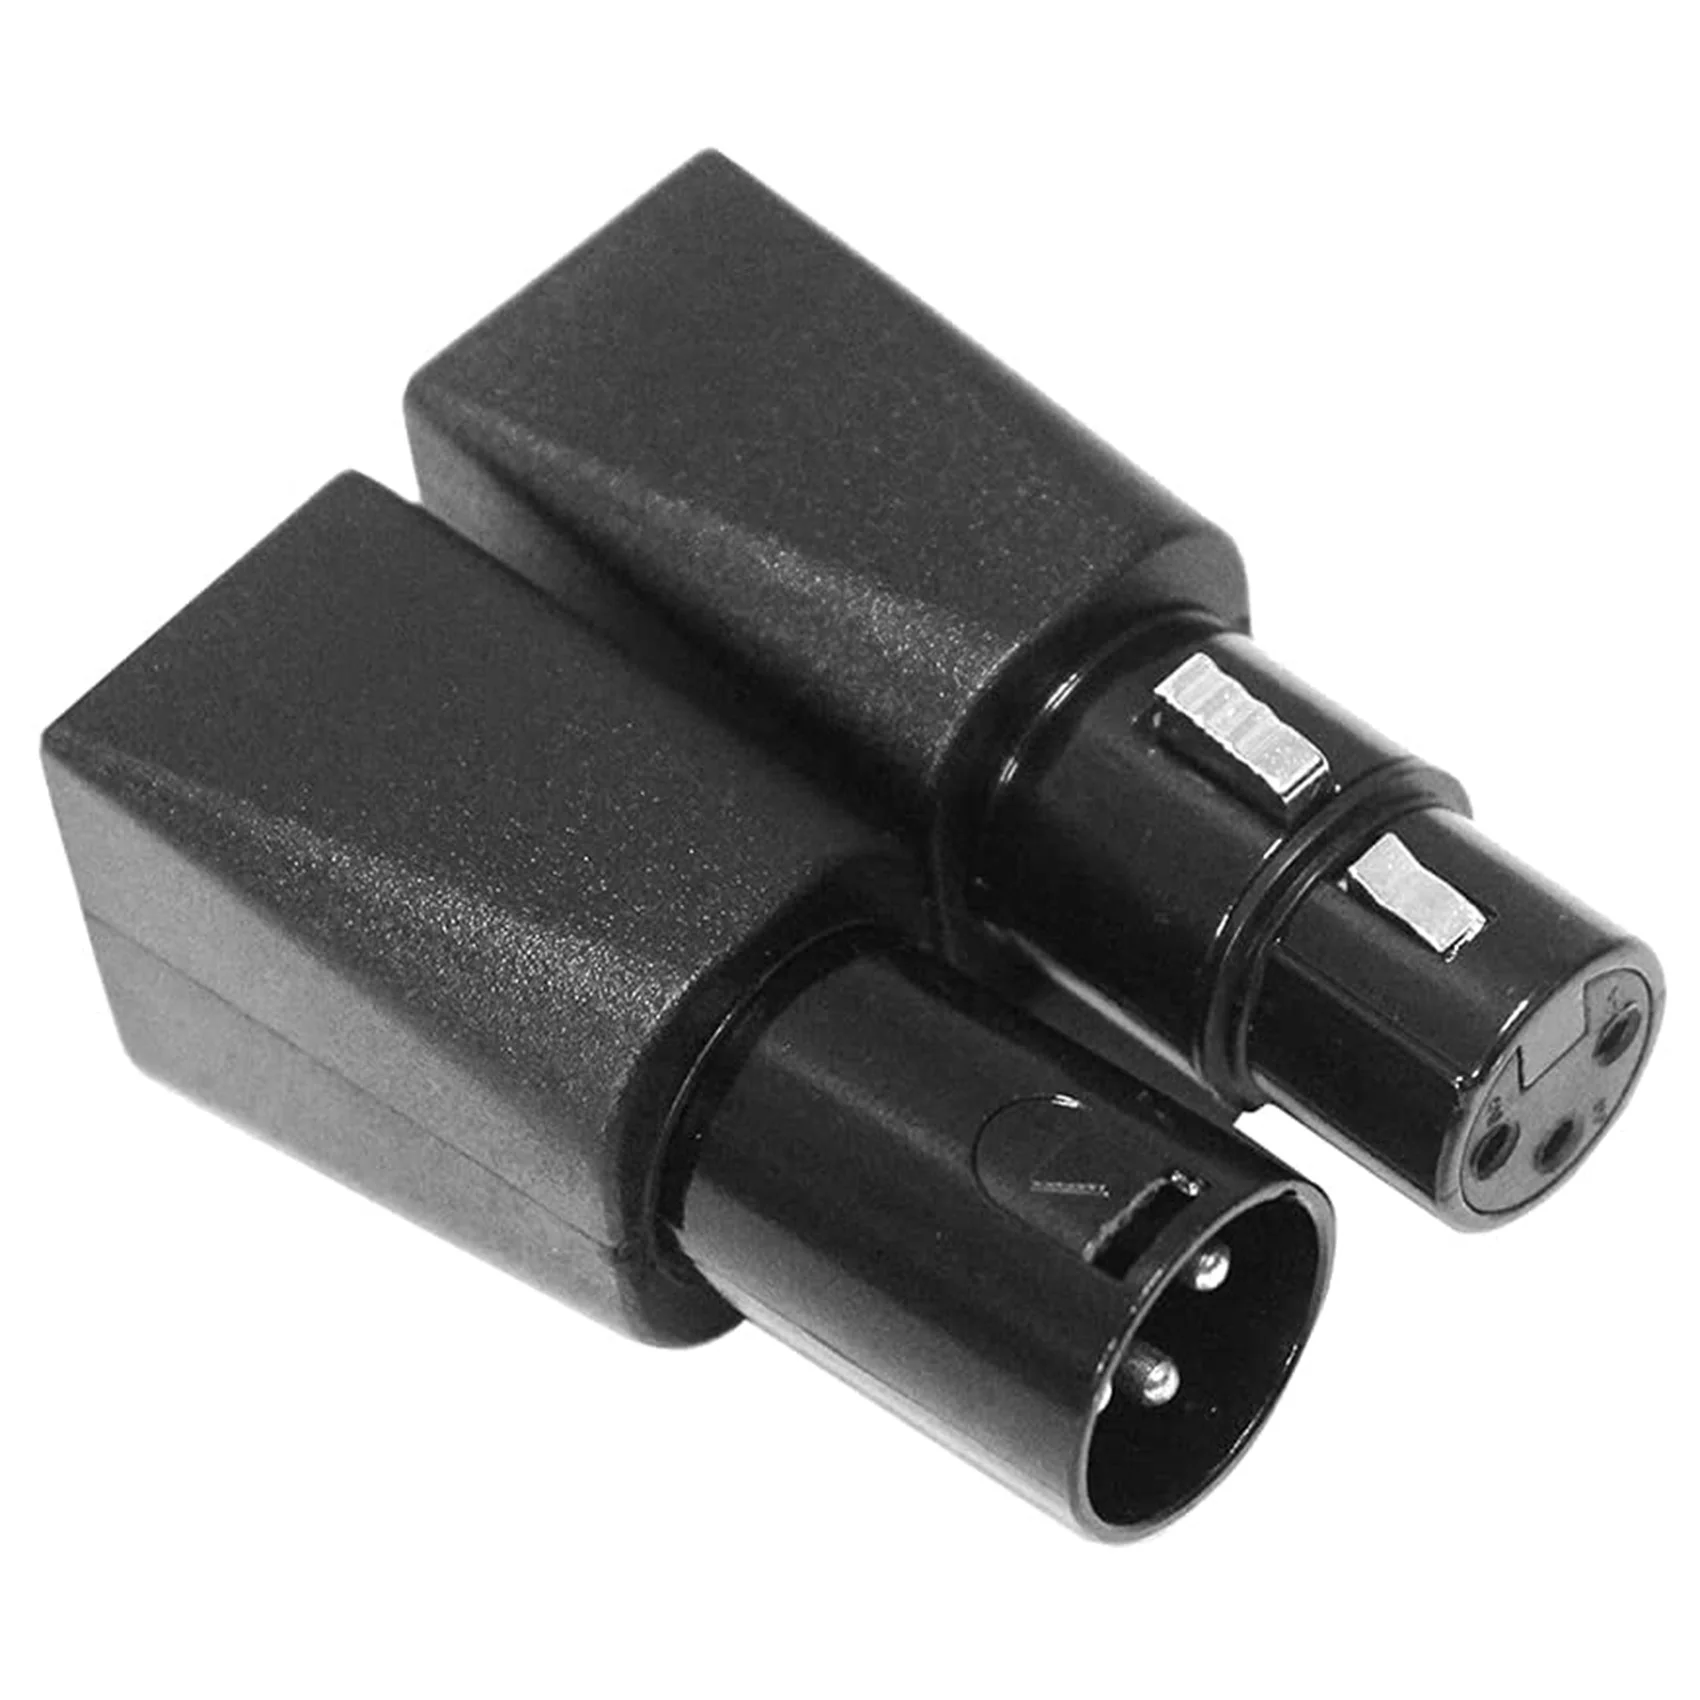 

DMX to RJ45 Connector RJ45 Ethernet to 3 Pin XLR DMX Female & Male Adapter Sets (3PIN 1Pair)